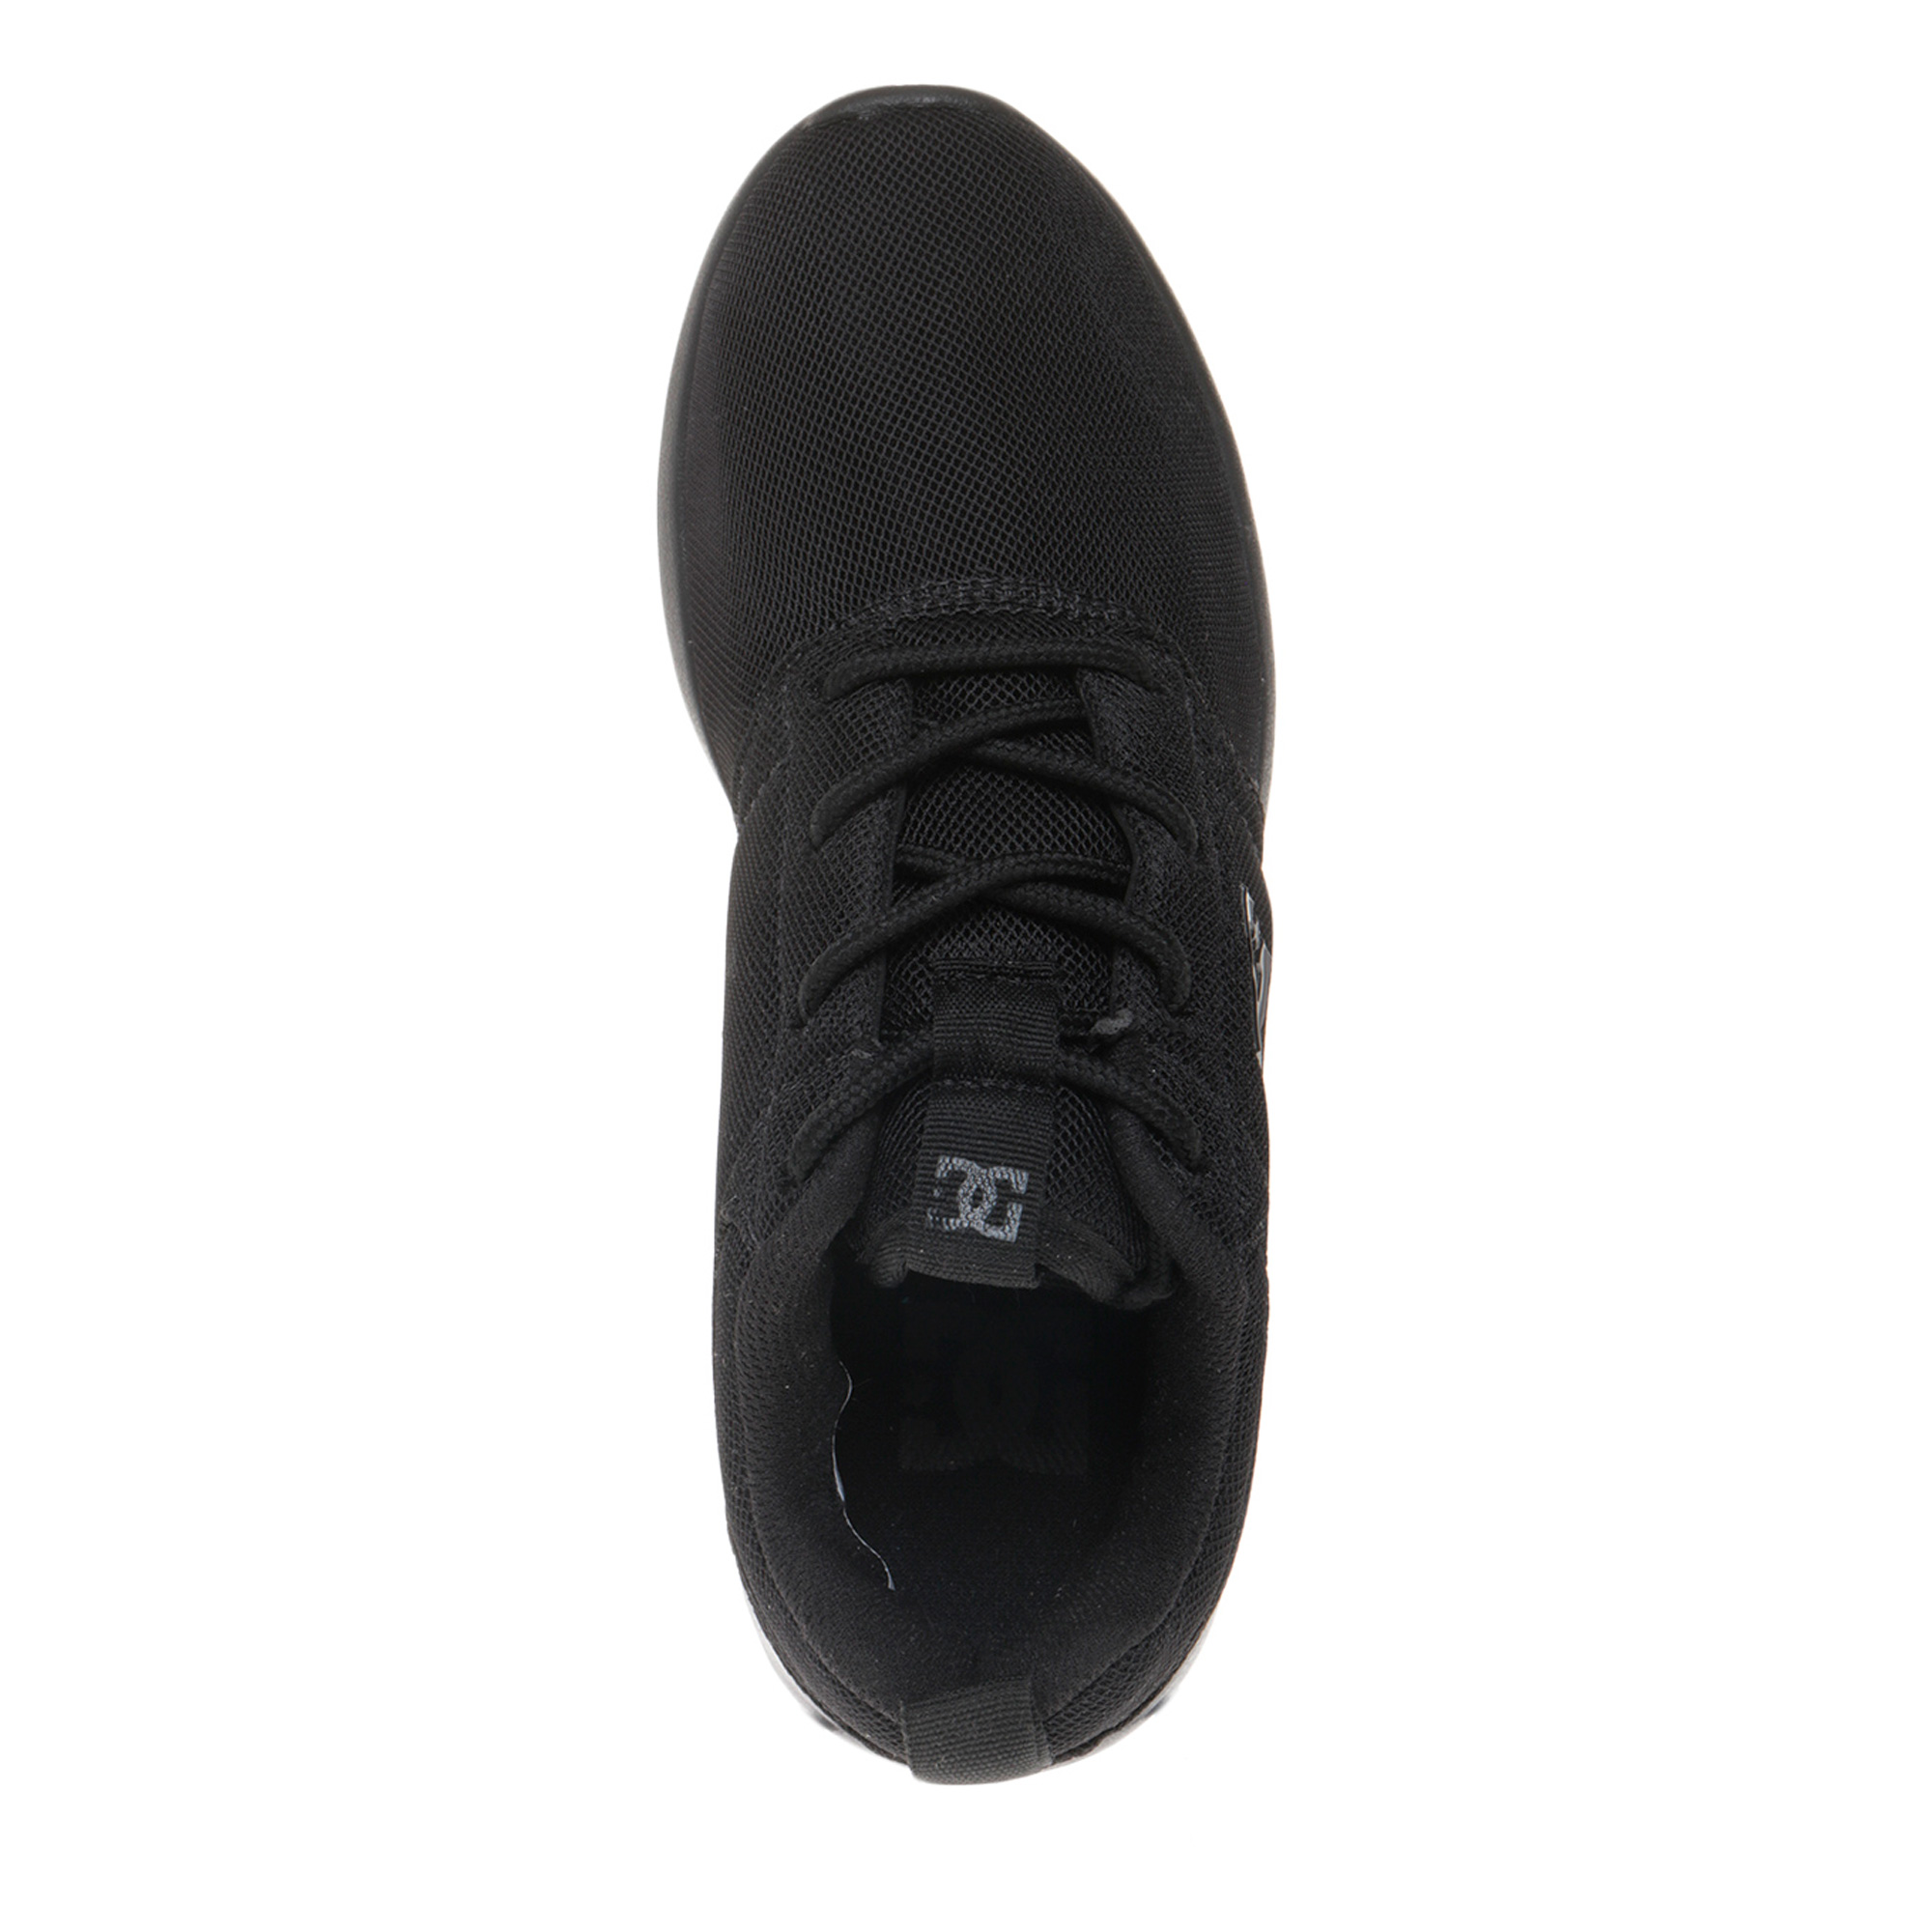 Tenis DC SHOES Mujer MIDWAY NX Negro